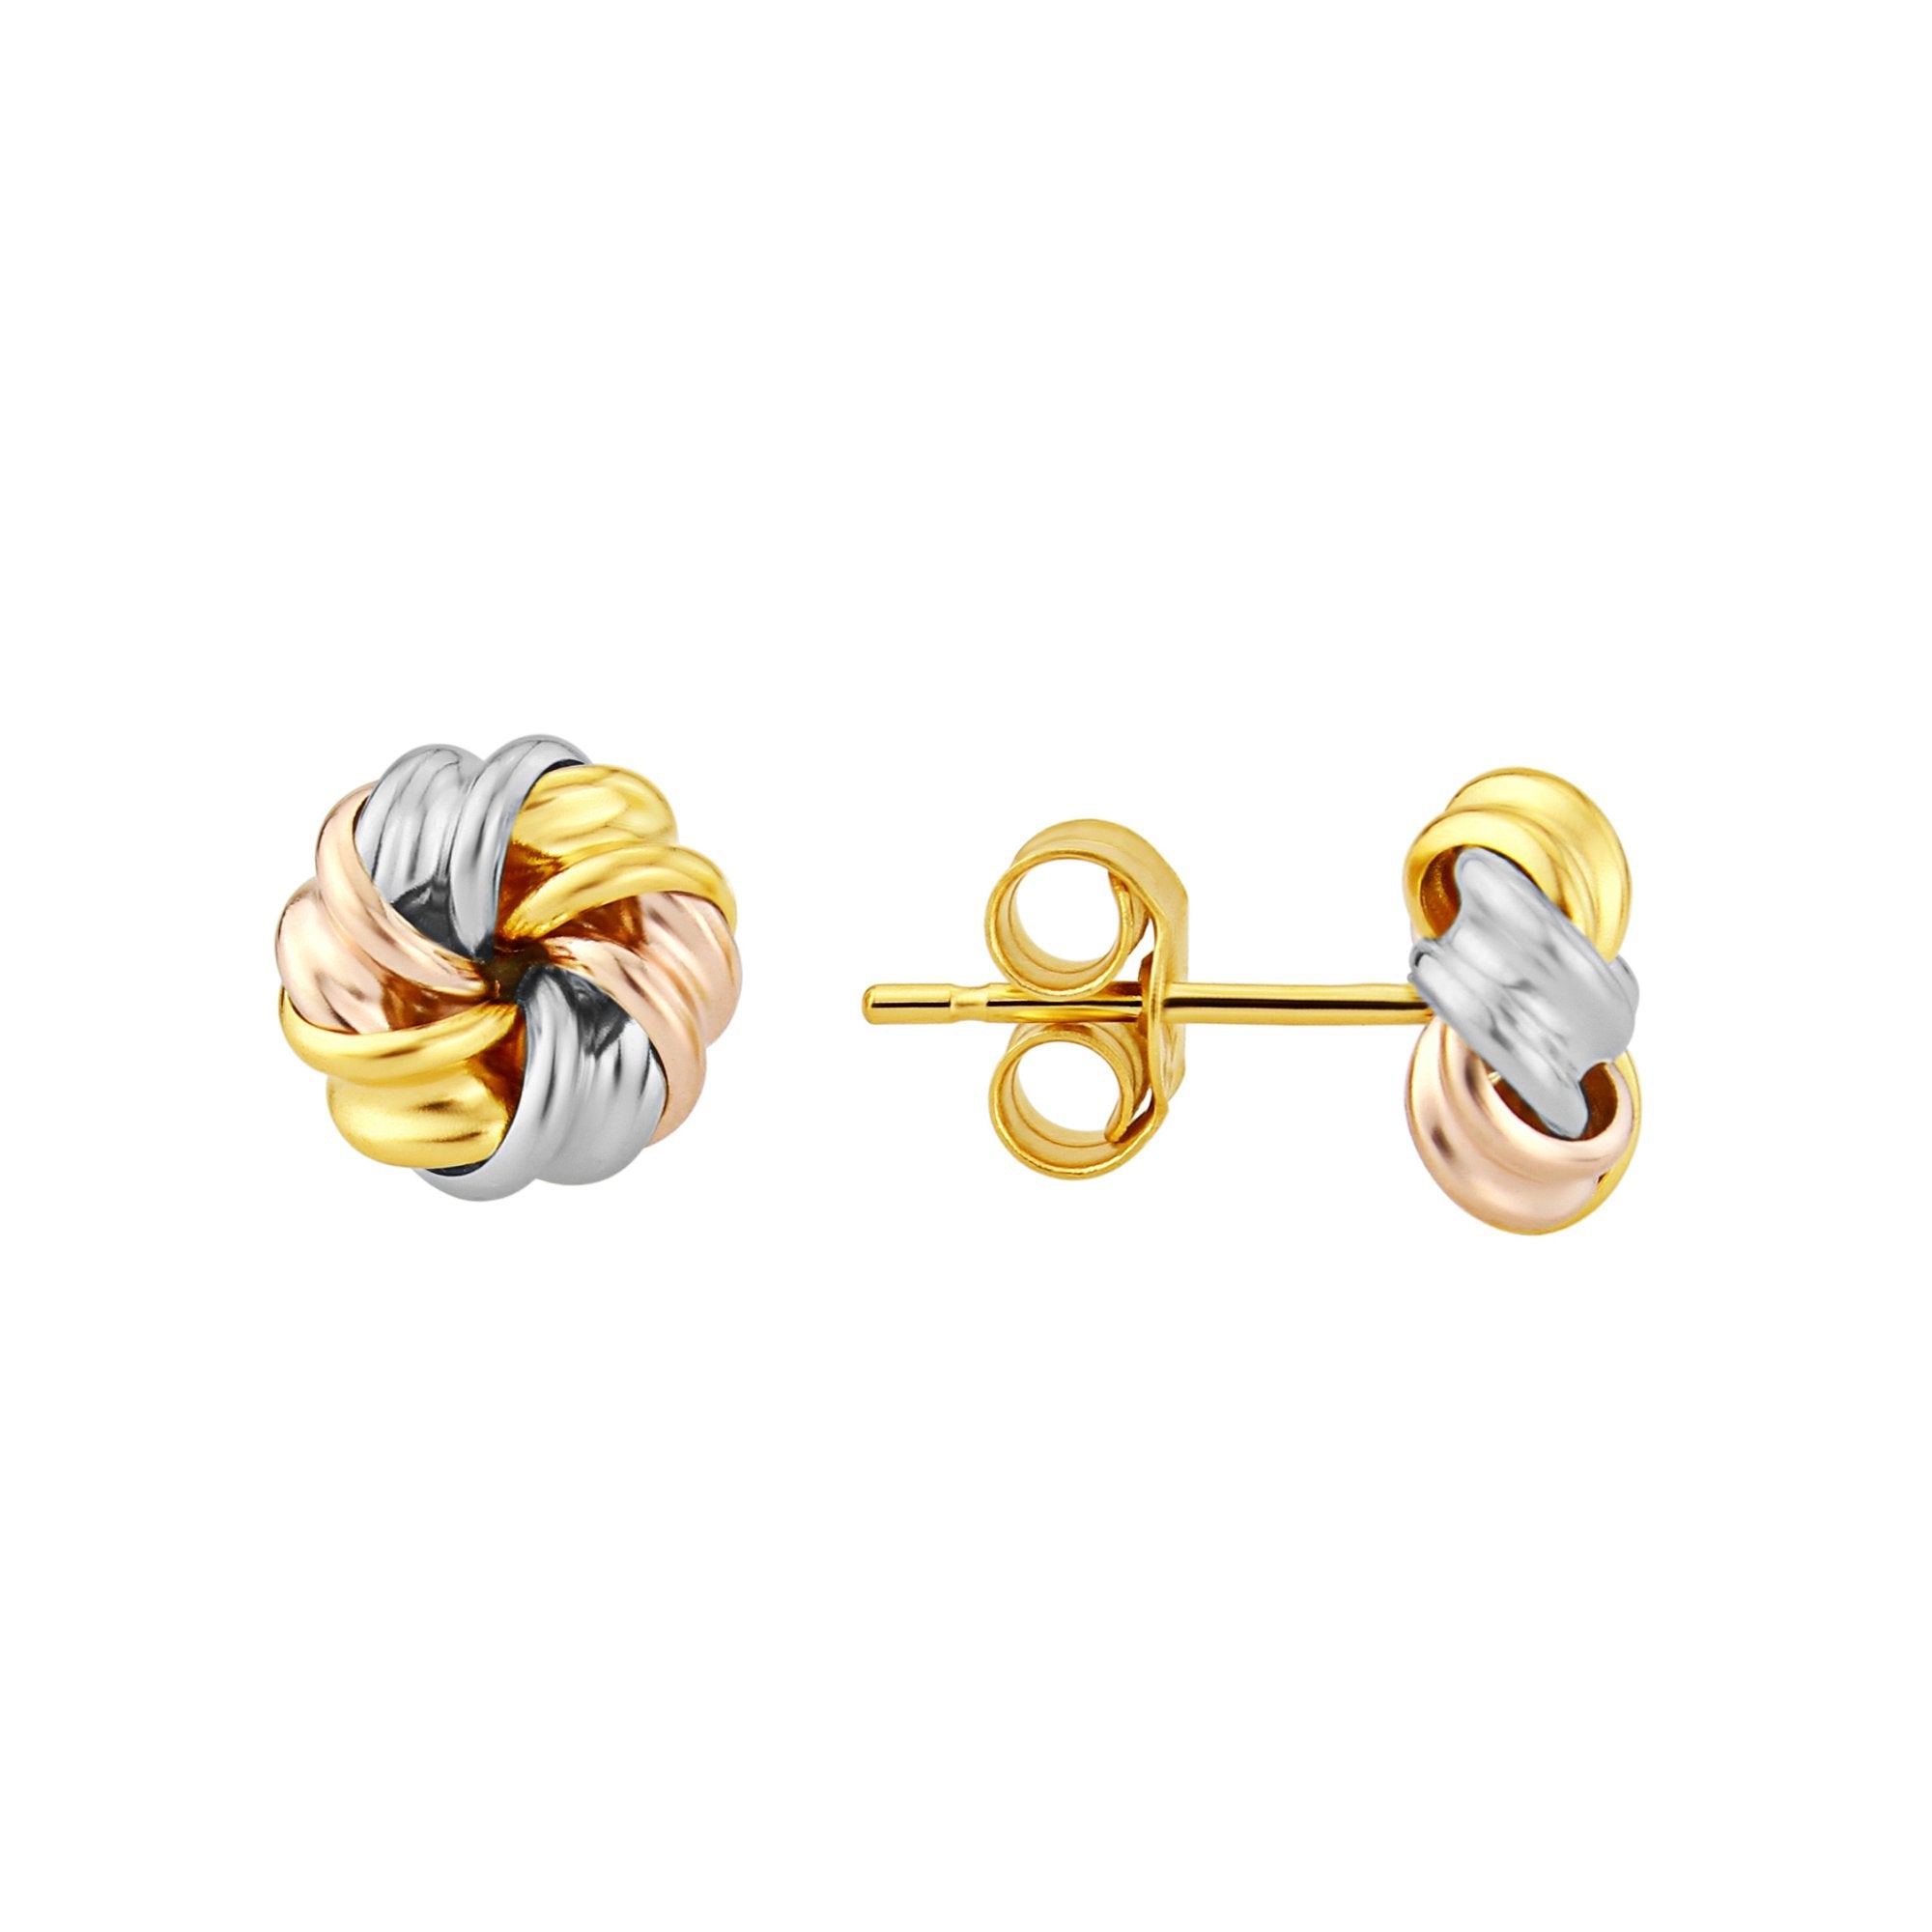 9ct gold knot stud earrings